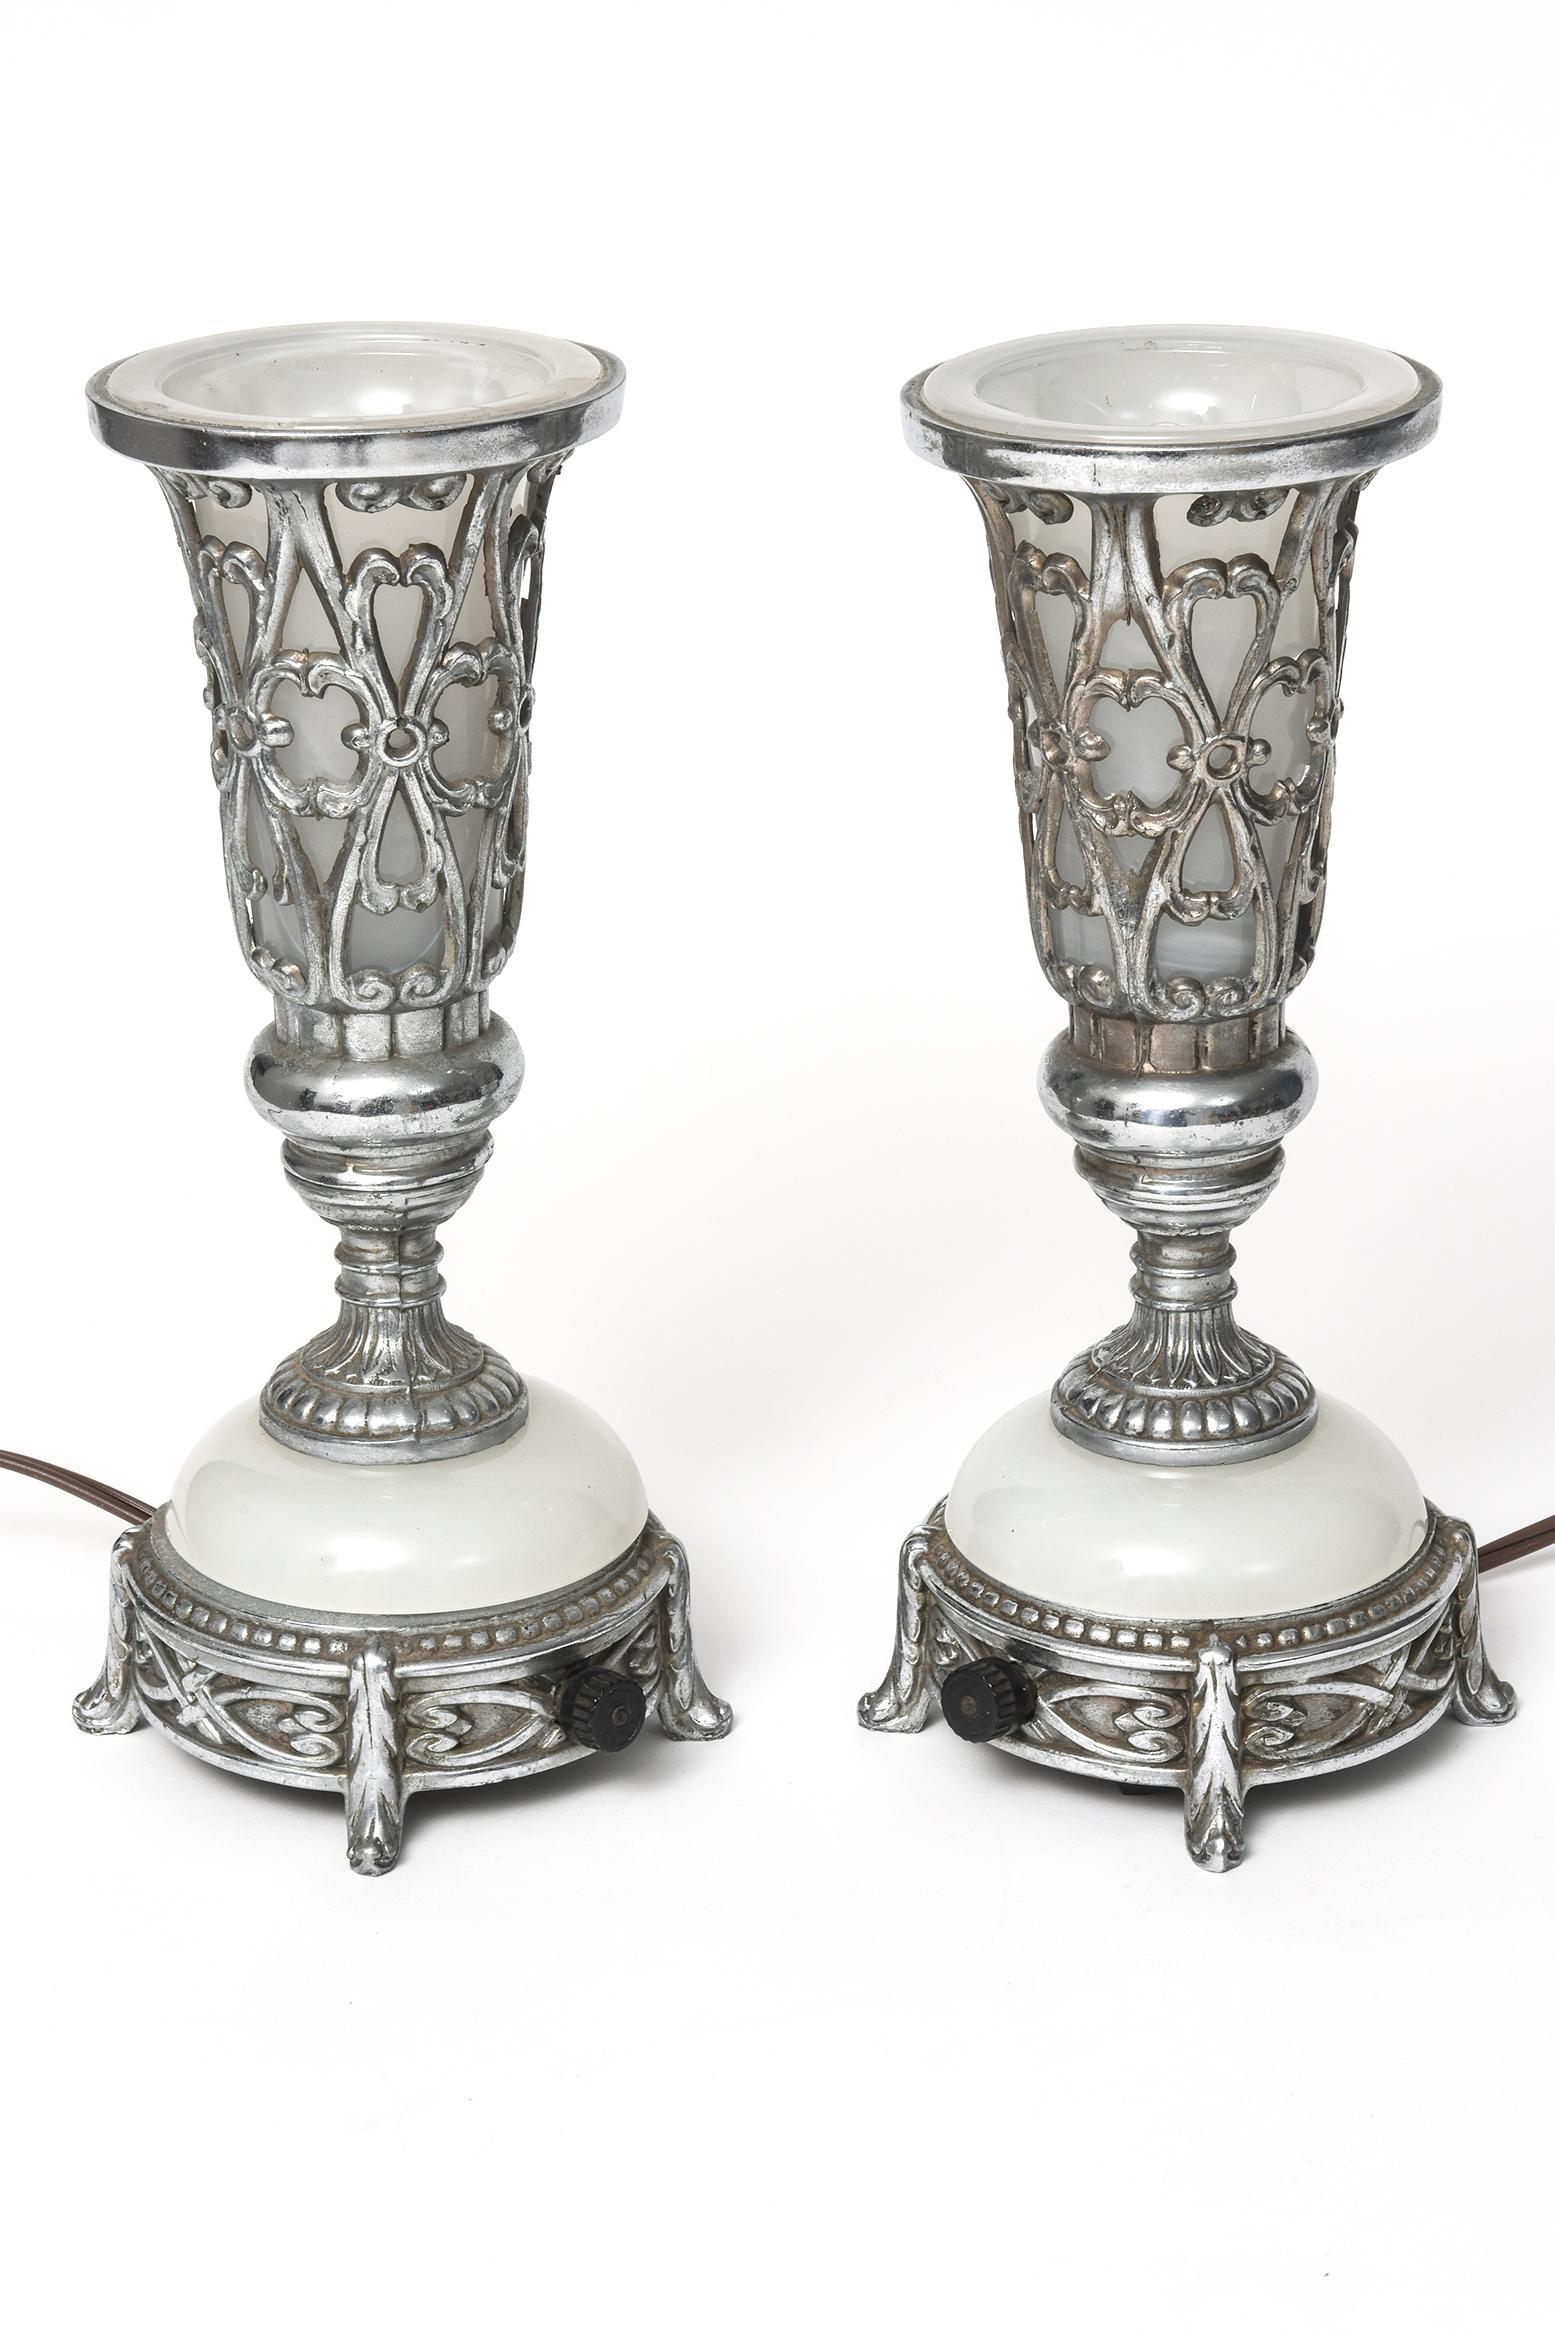 Rare pair of Art Deco table or mantle lamps - perfect for dim romantic lighting or as night lights.
These lamps are made of chrome plated metal and milk glass. The top section over the white tulip shaped glass section is pierced. The center section